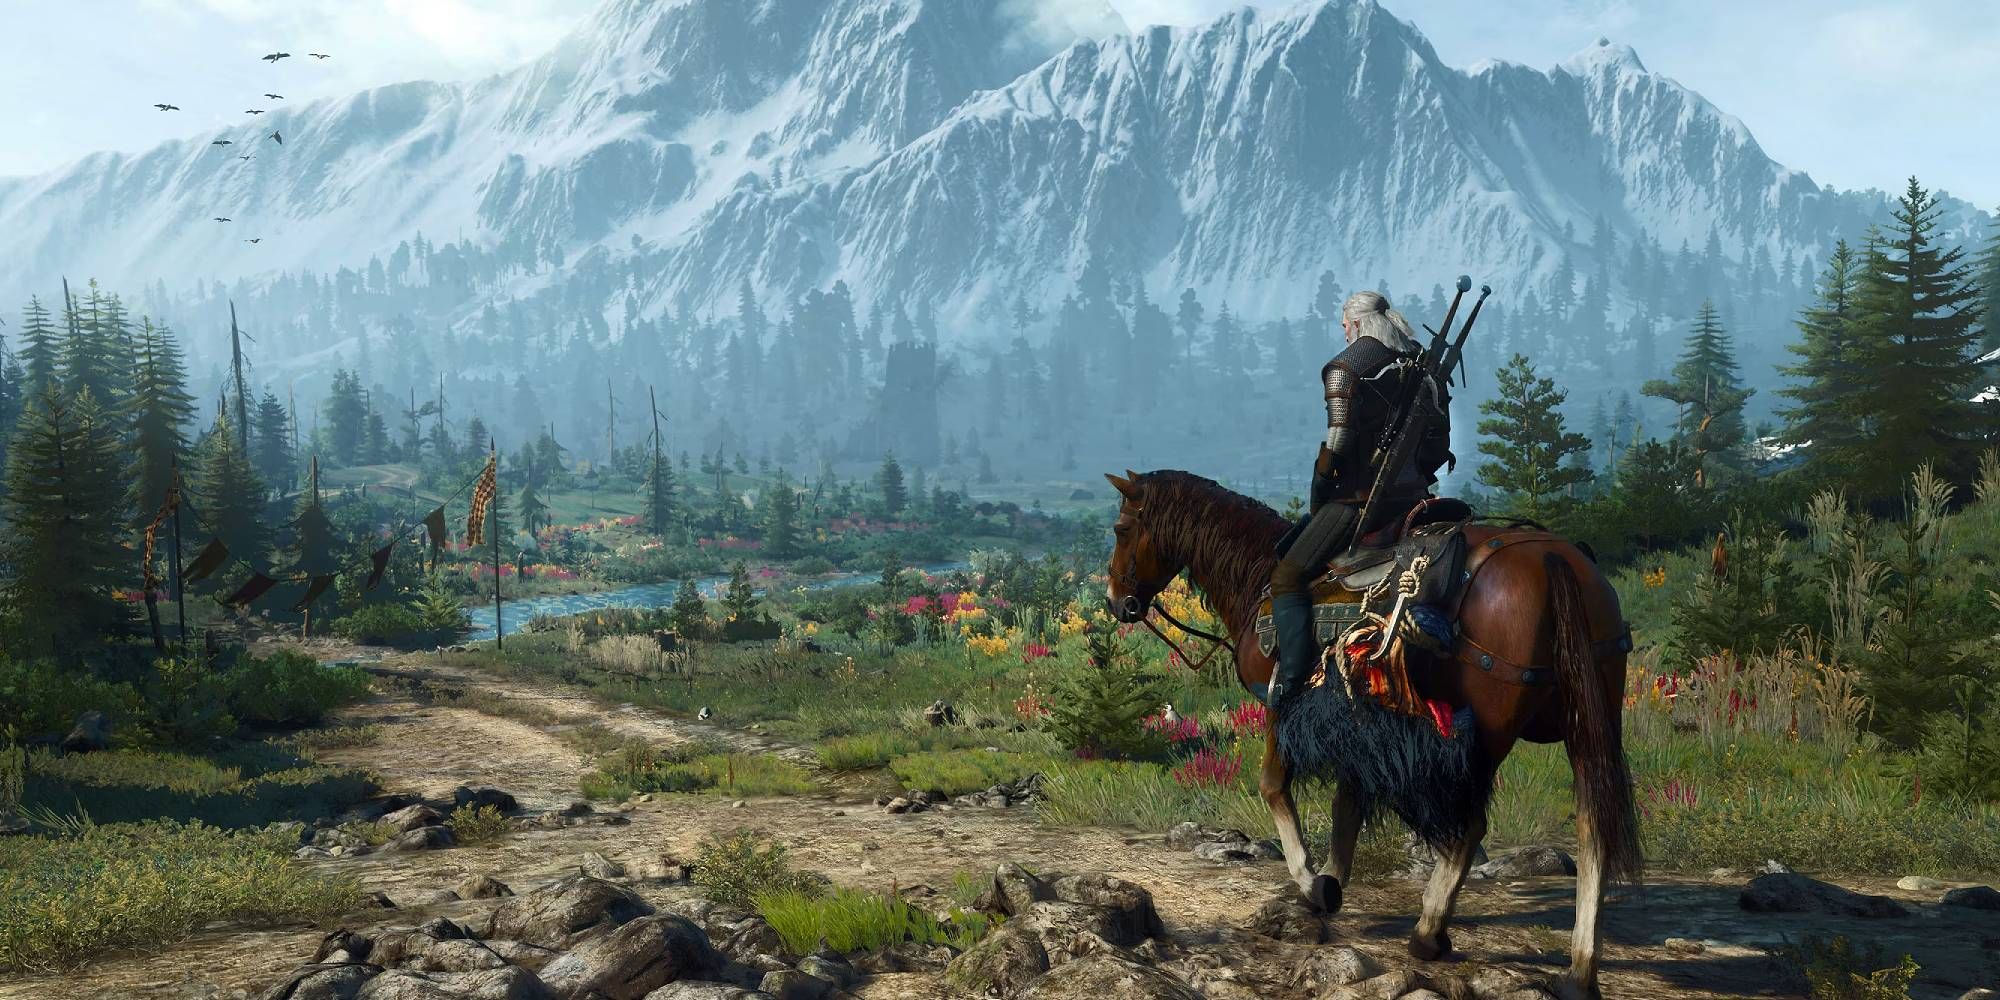 Geralt riding on Roach in a field in The Witcher 3